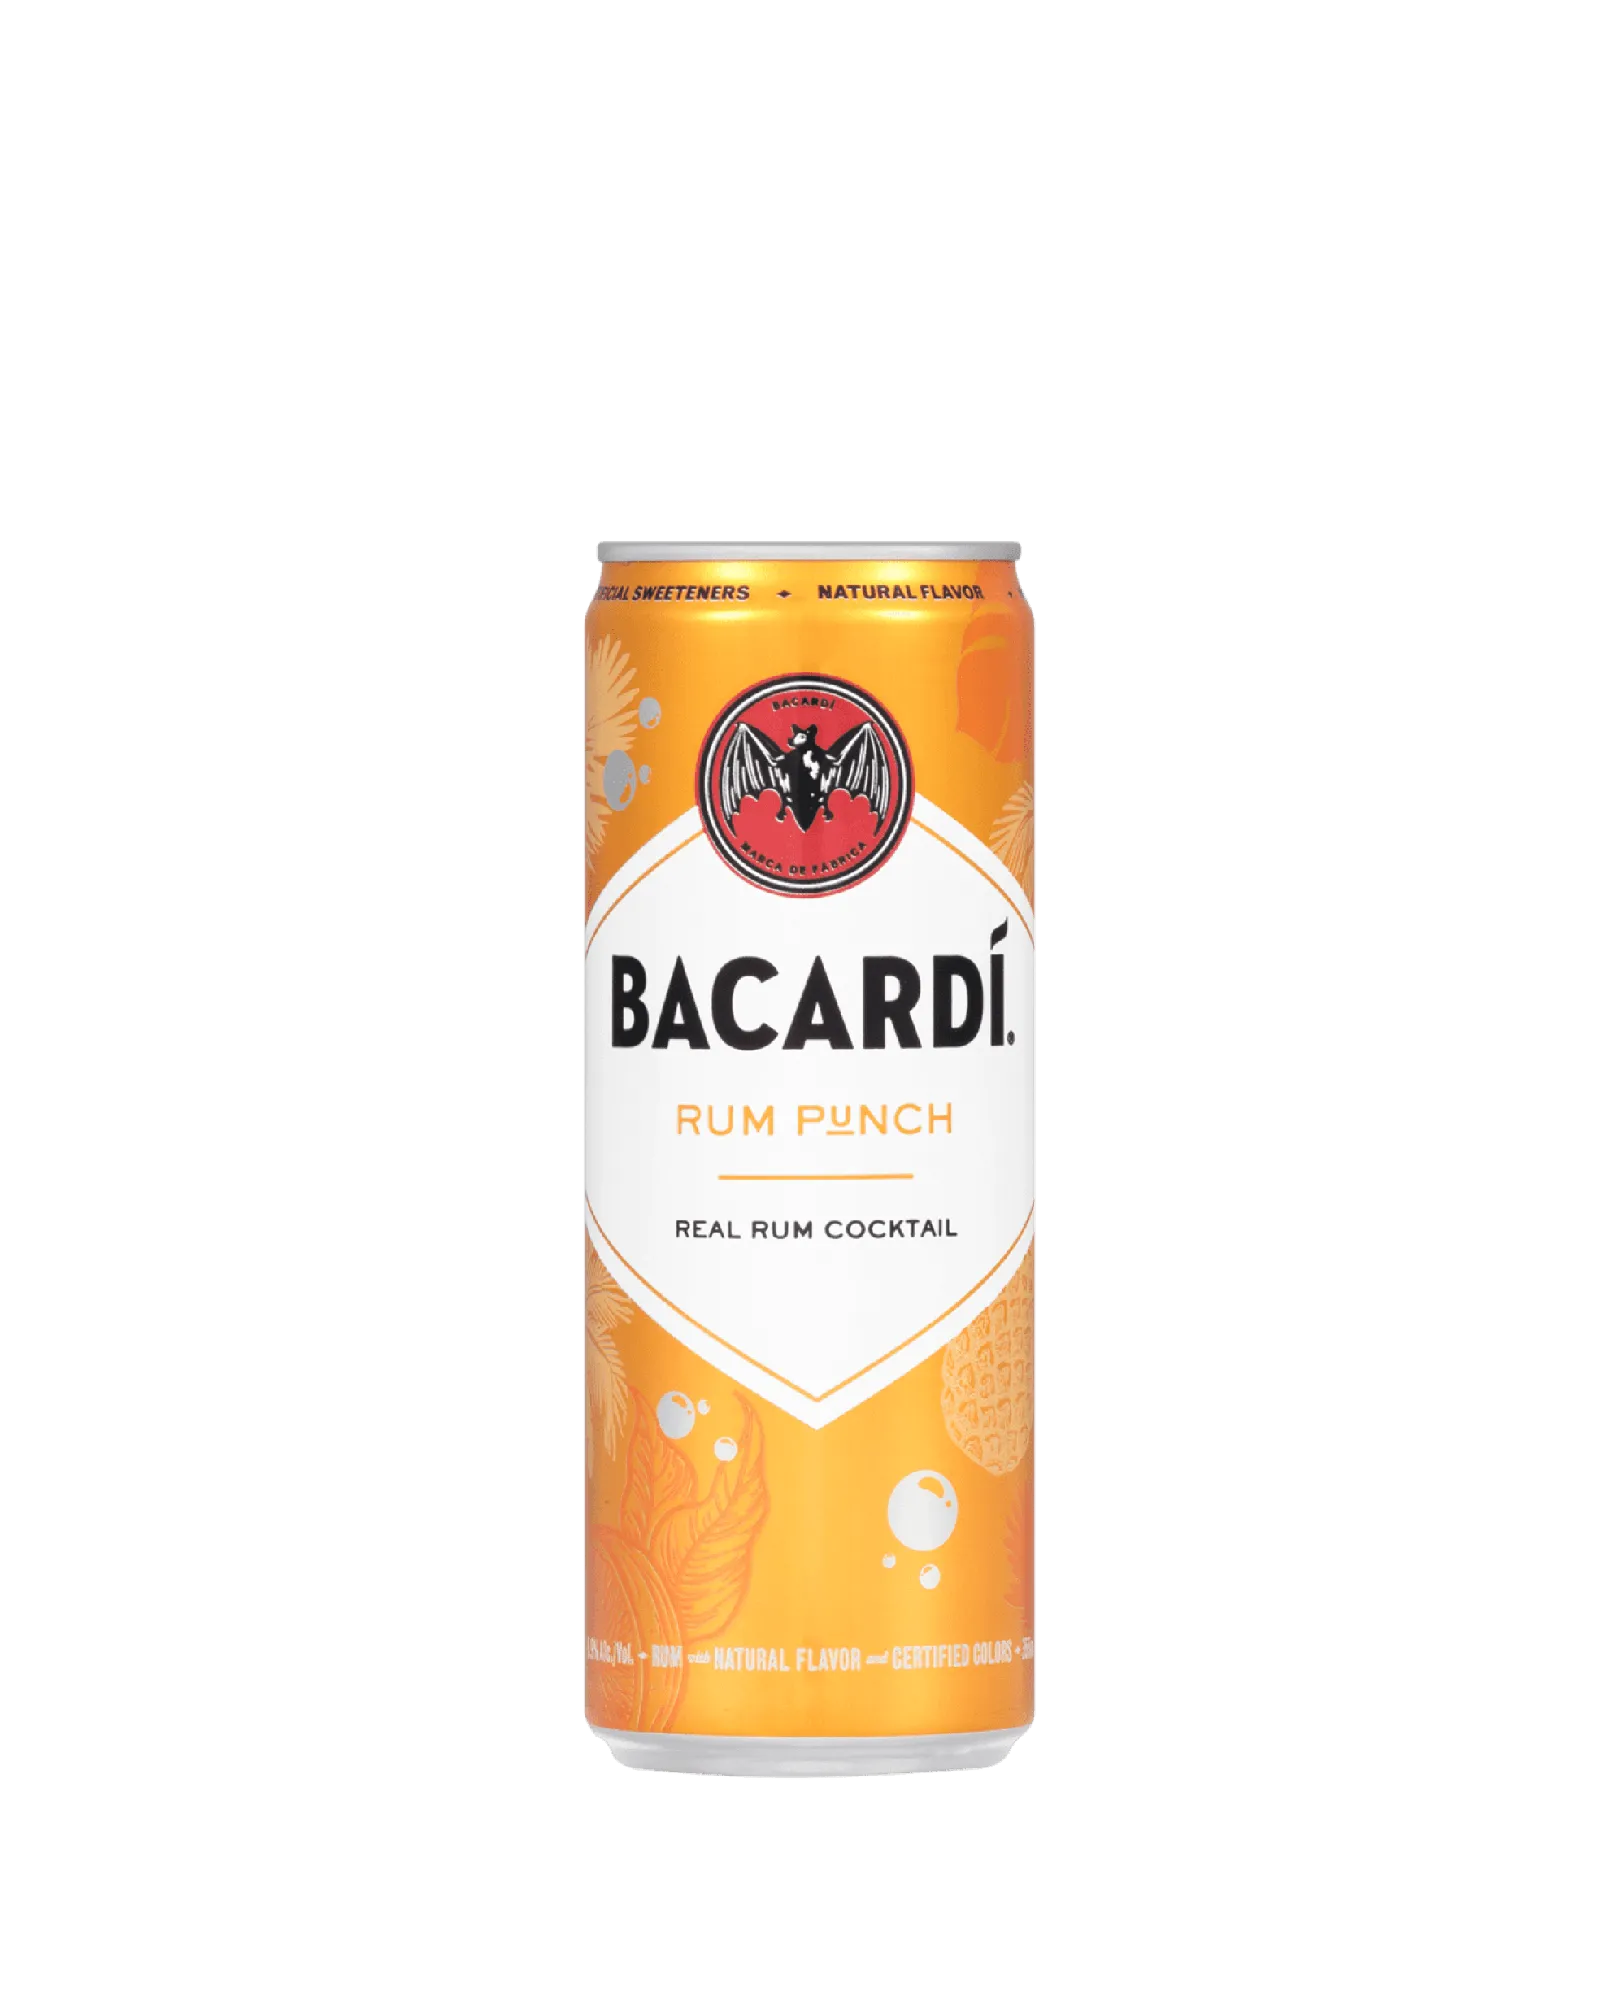 Image - Rum Punch by Bacardi